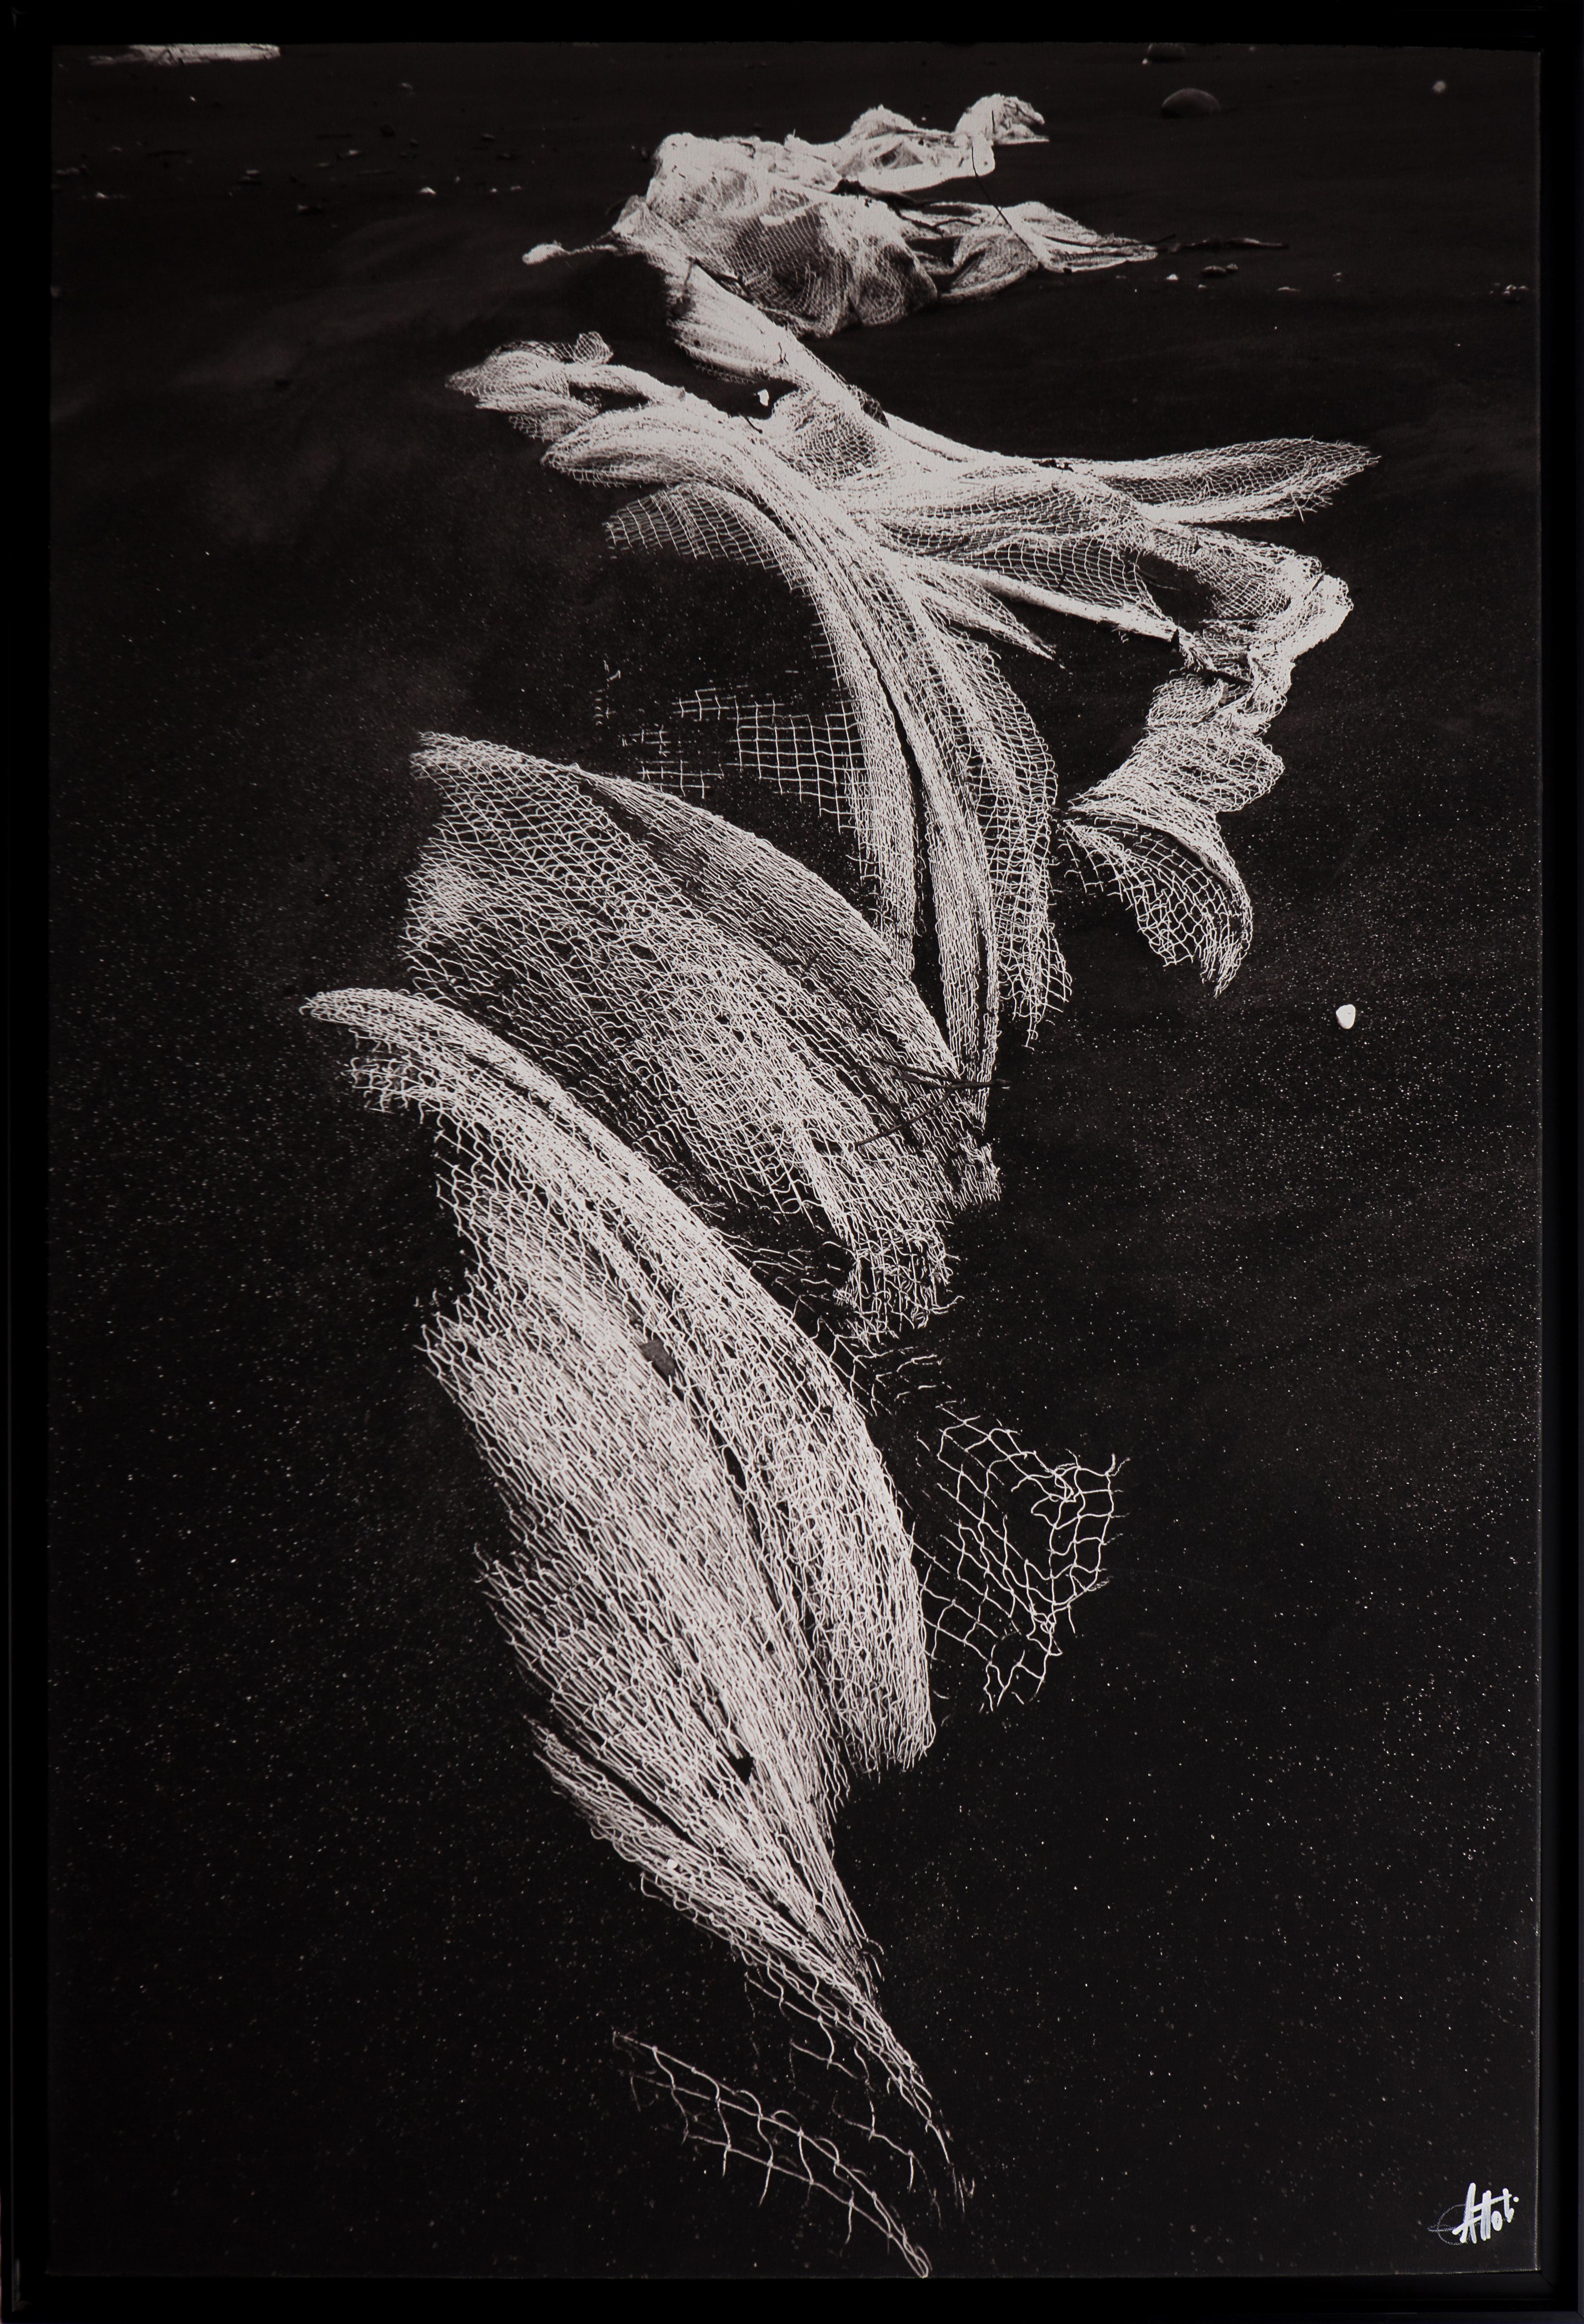 Sold with wooden frame in black color or others : 90 x 130 x 5 cm - 35,4 x 51,2 x 1,9 in, ed. 3/7

Olivier Attar - Attoli is a French photographer born in 1971 who lives & works in Le Cannet, France. The subject of the water and sea remains a main